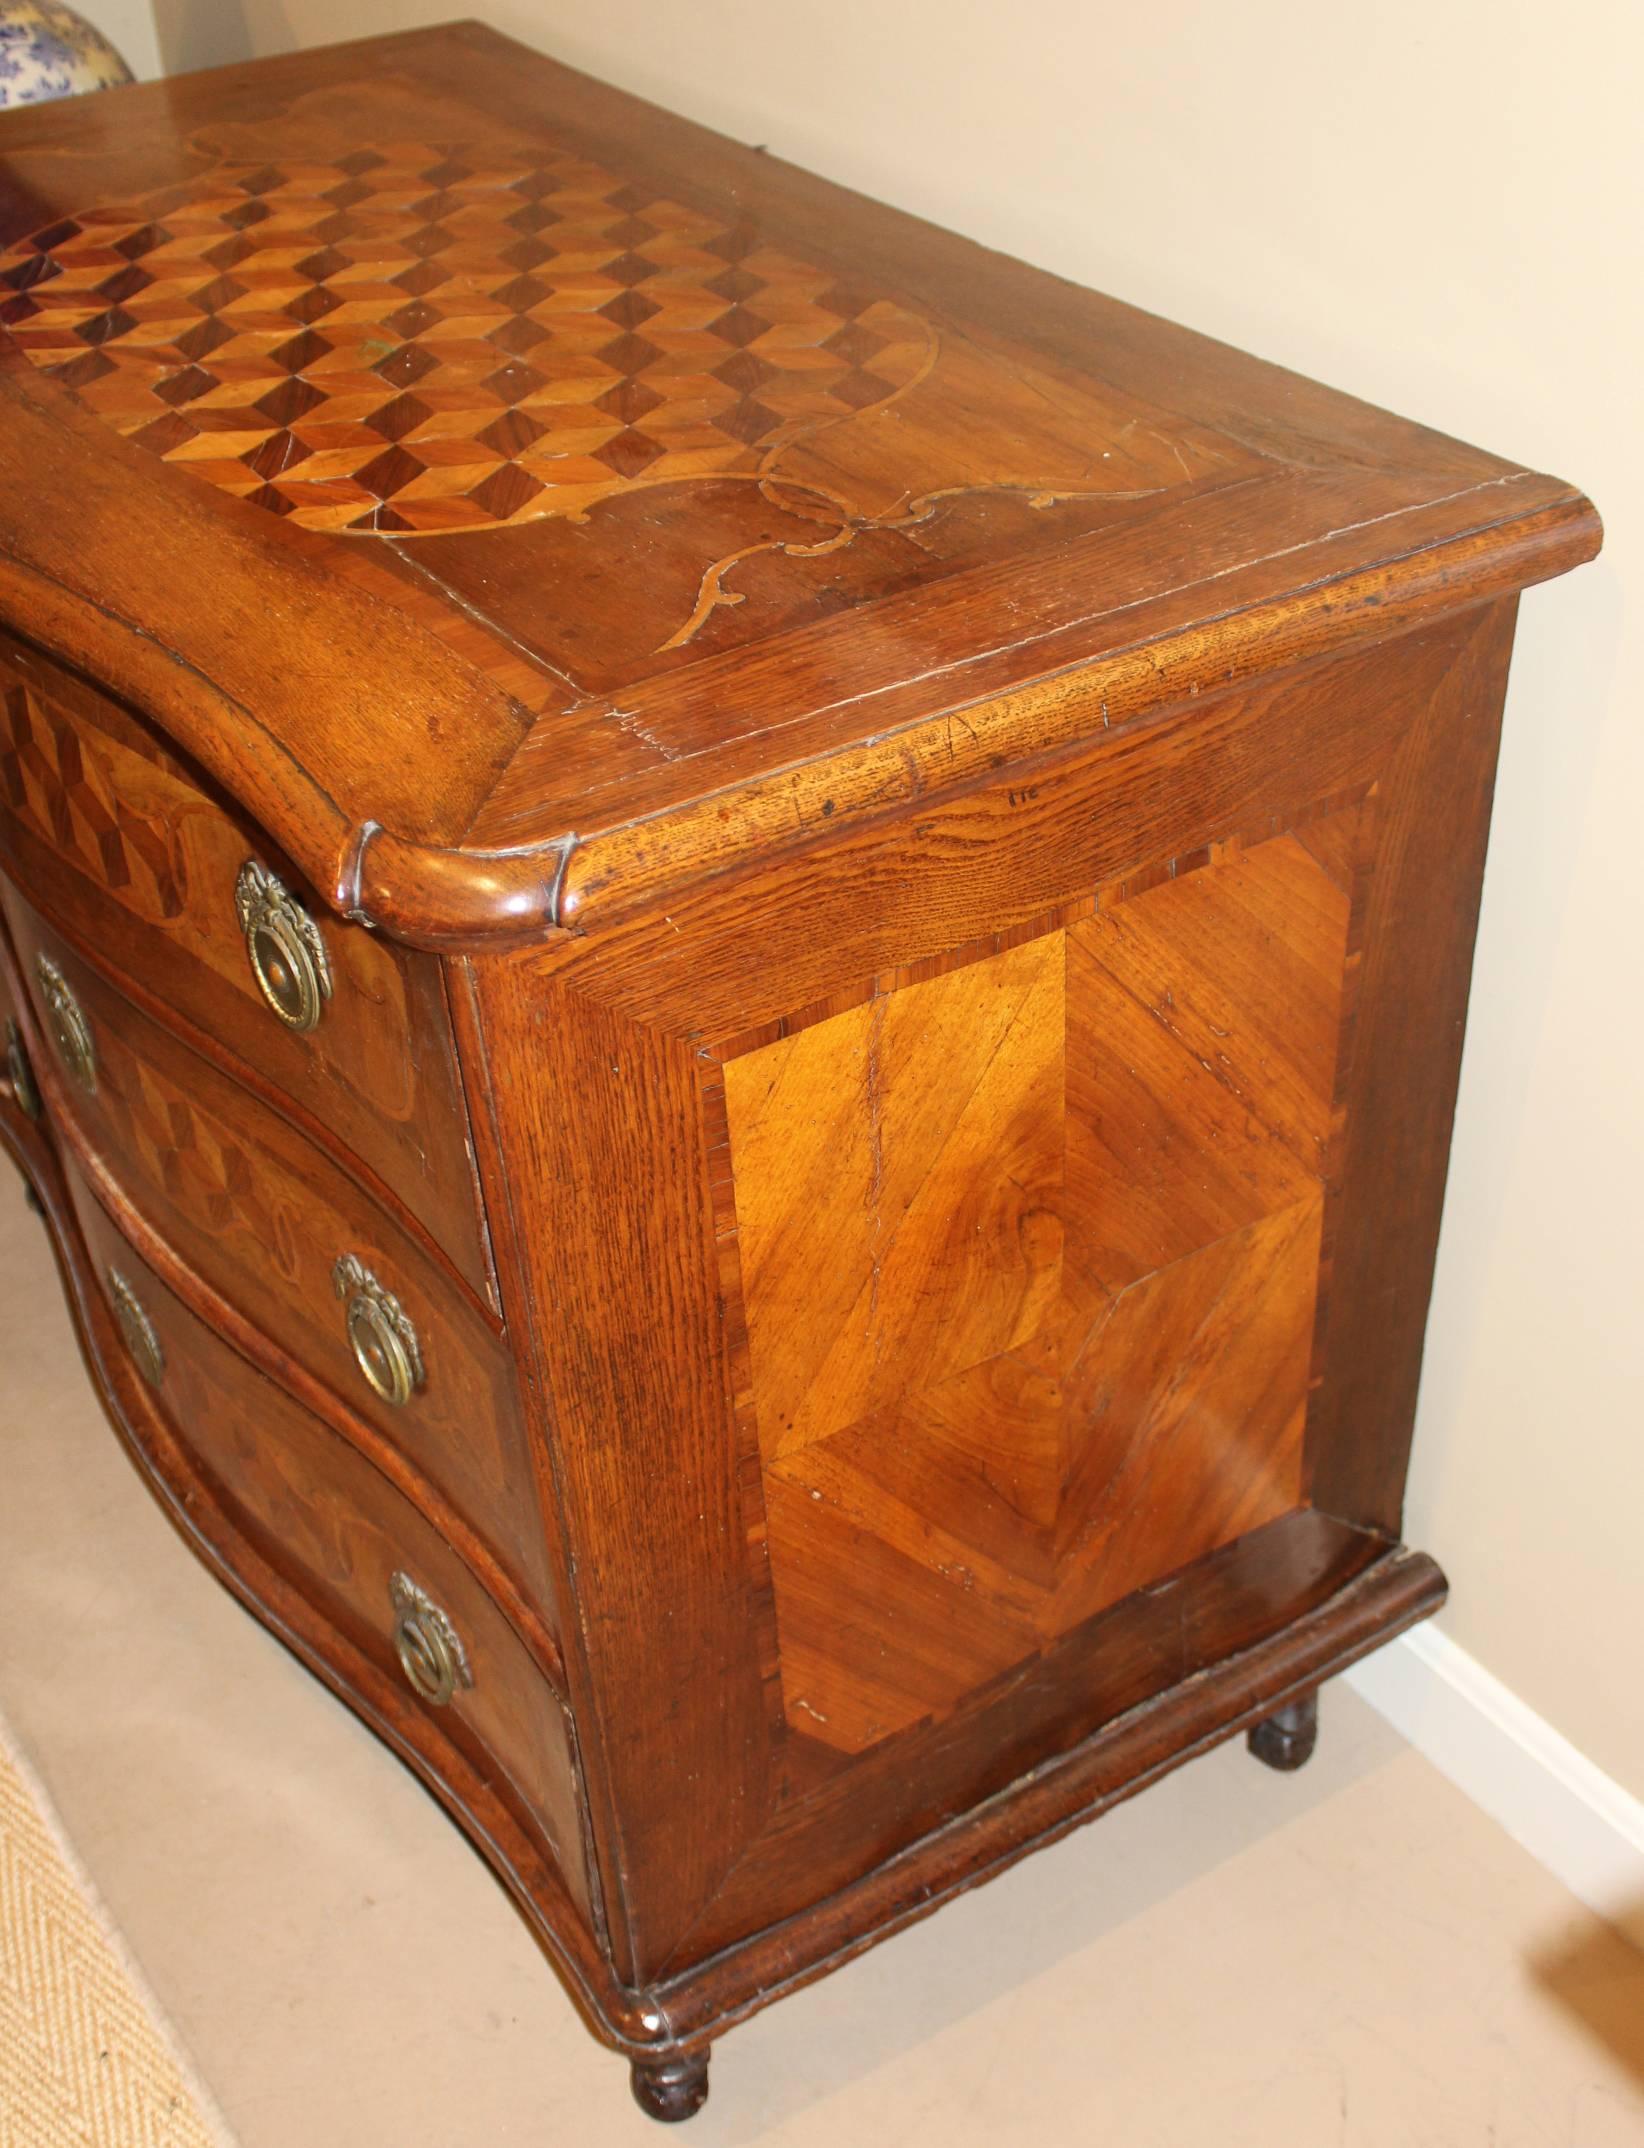 A fine example of a Continental Rococo fruitwood three drawer commode with serpentine front, probably Swiss in origin, dating to the 18th century, with exceptional tumbling block parquetry on the top and drawer fronts, a molded conforming top, and